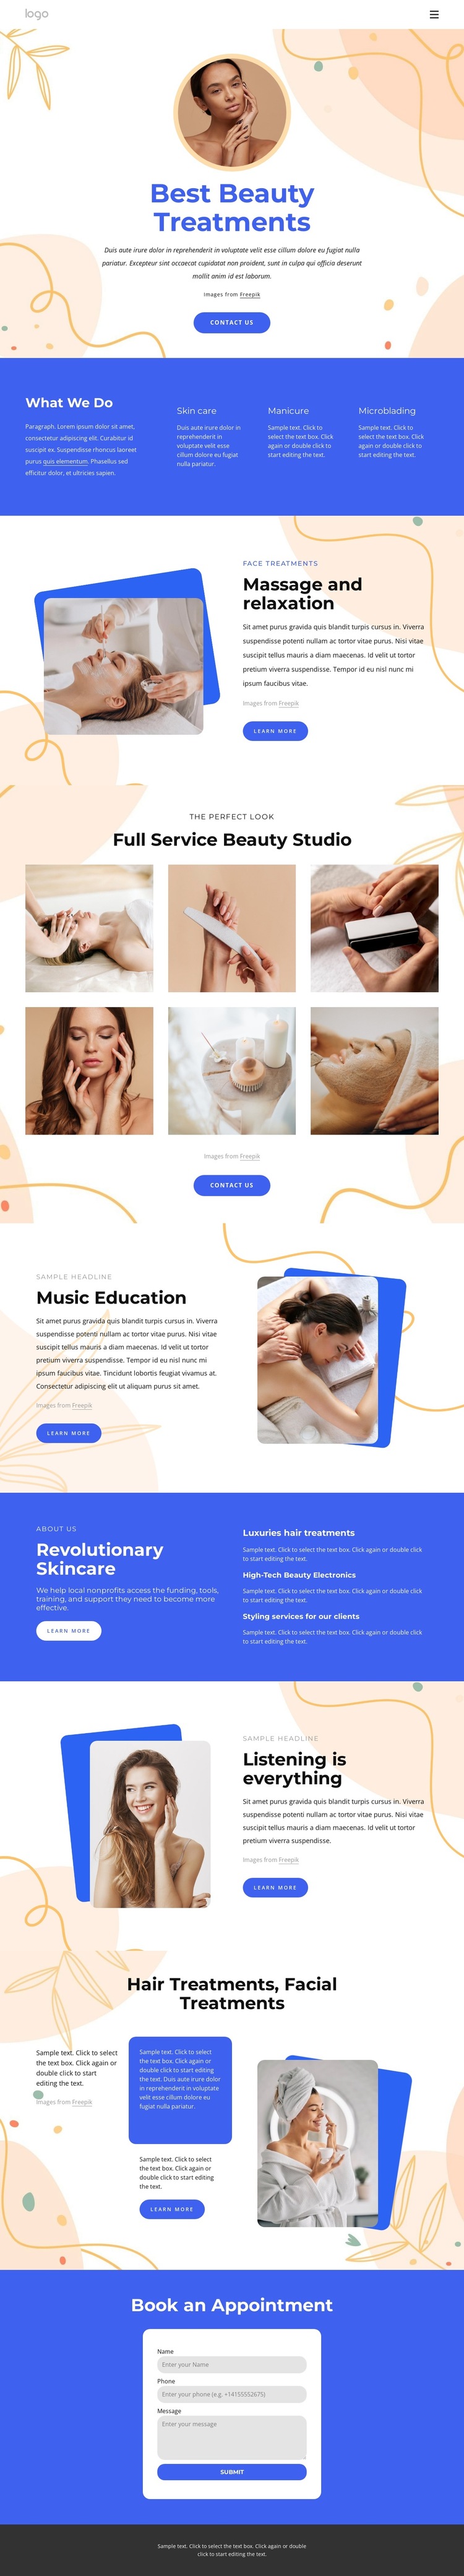 Our beauty treatments HTML5 Template